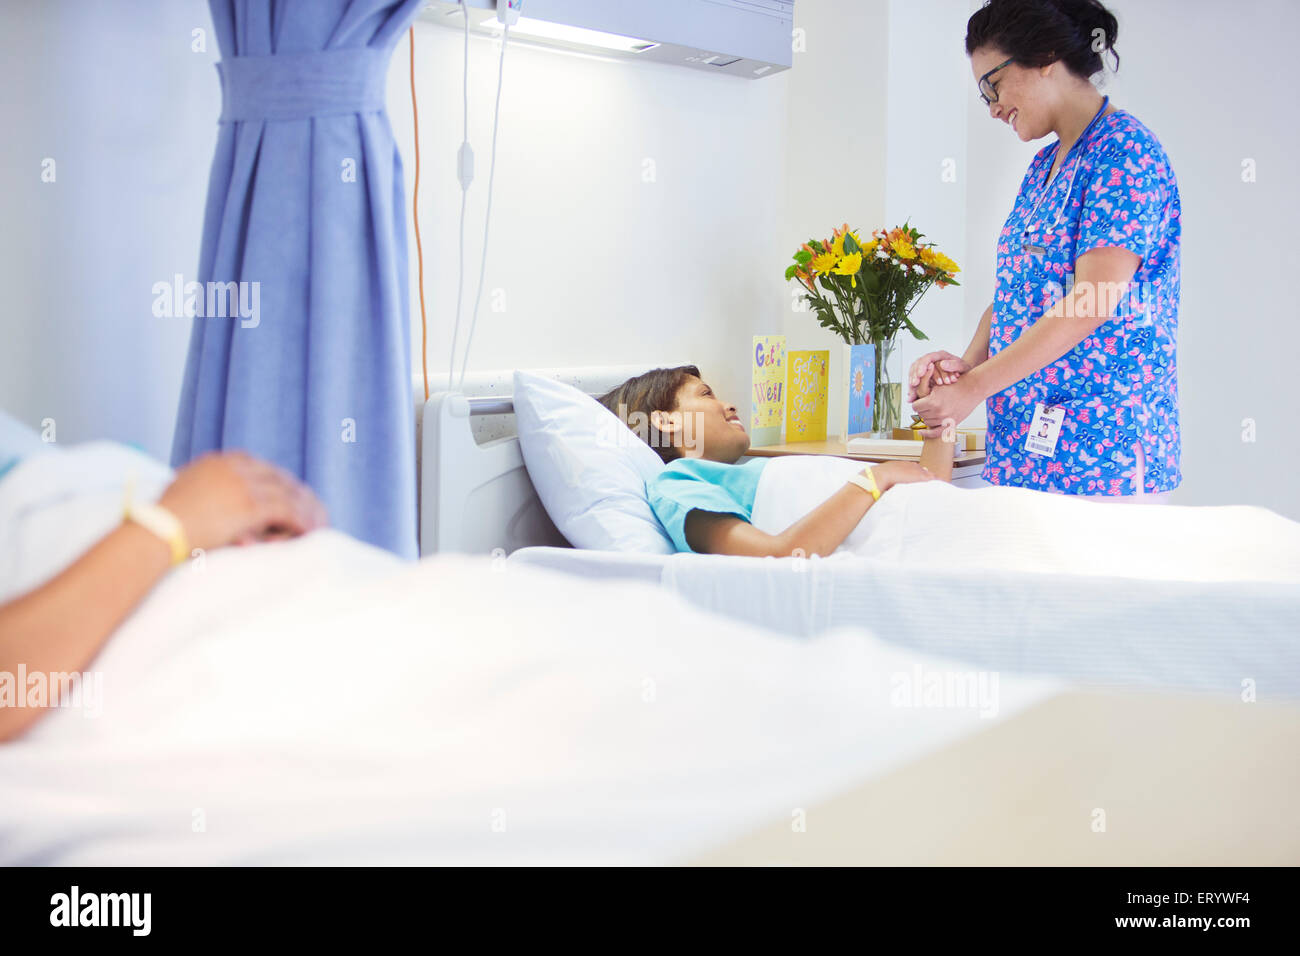 Nurse holding hands with patient in hospital room Stock Photo